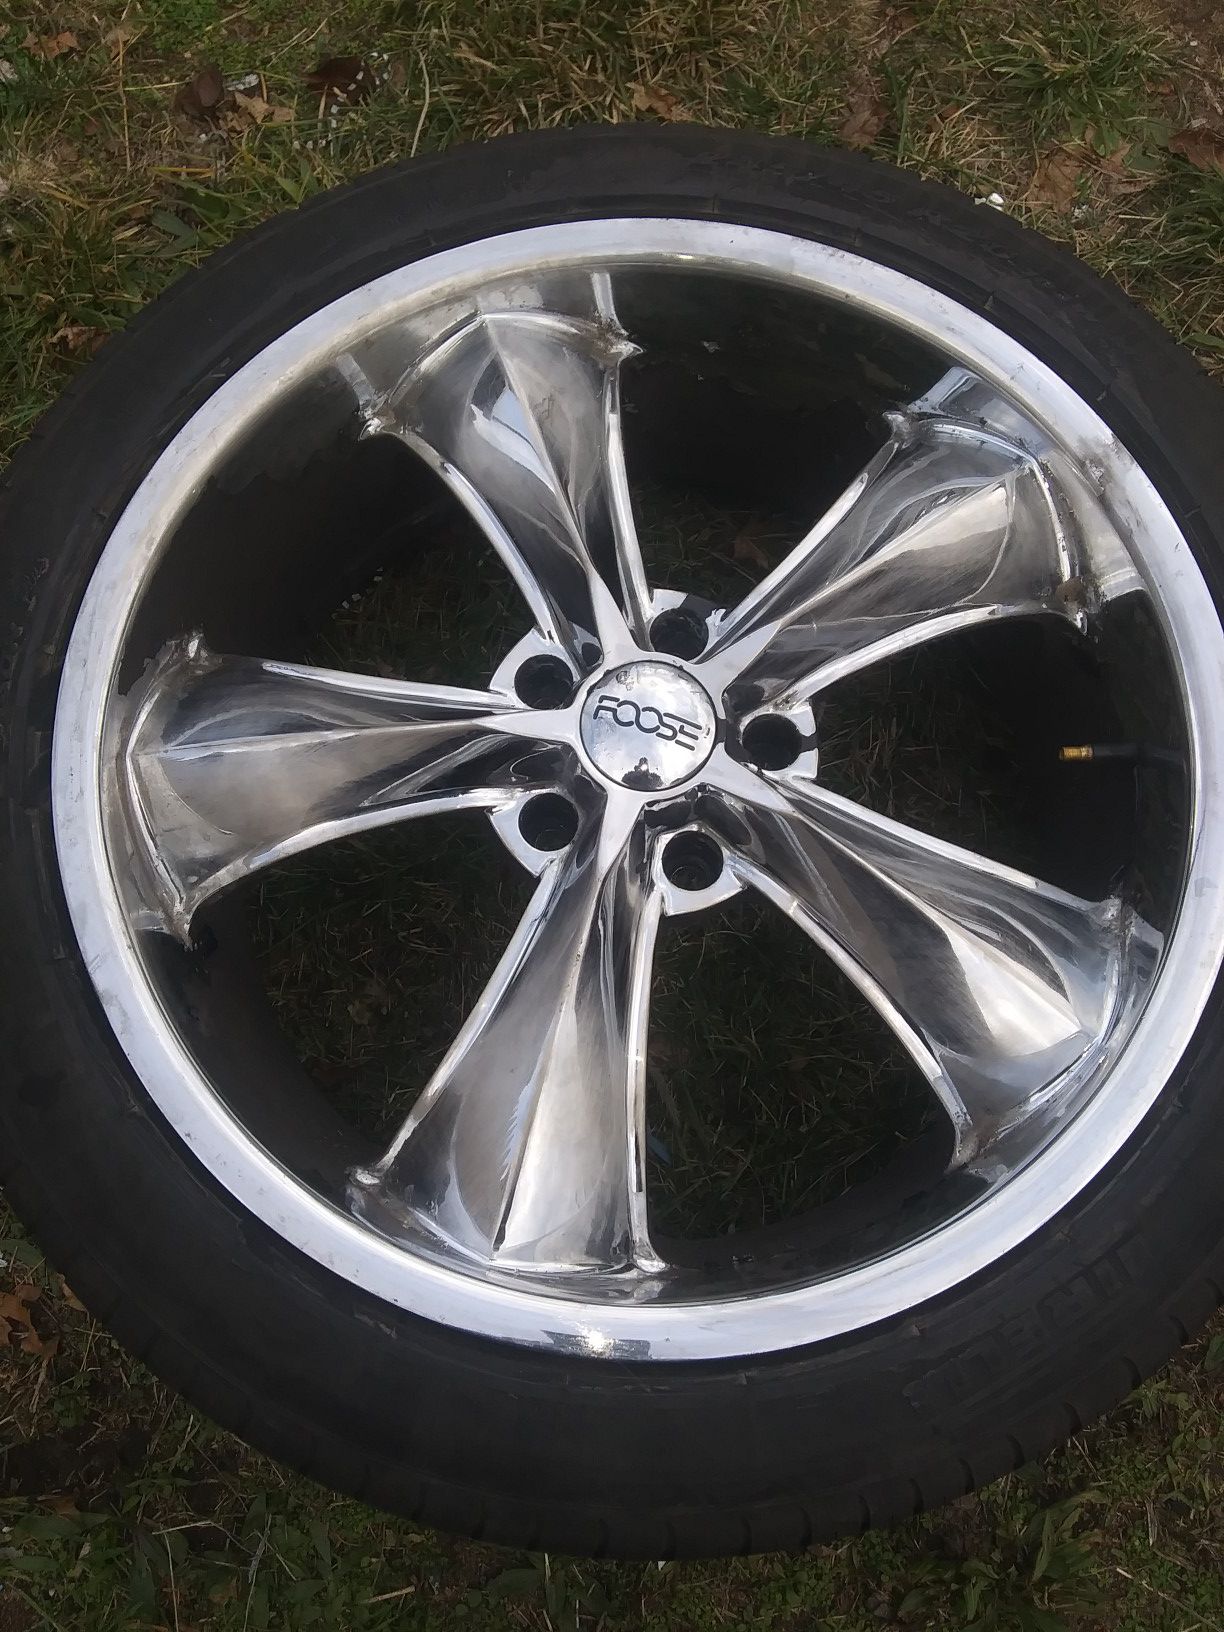 I have four rims and tires Foose wheels fit Chevy 4 rims 18 inch for Mustang brand